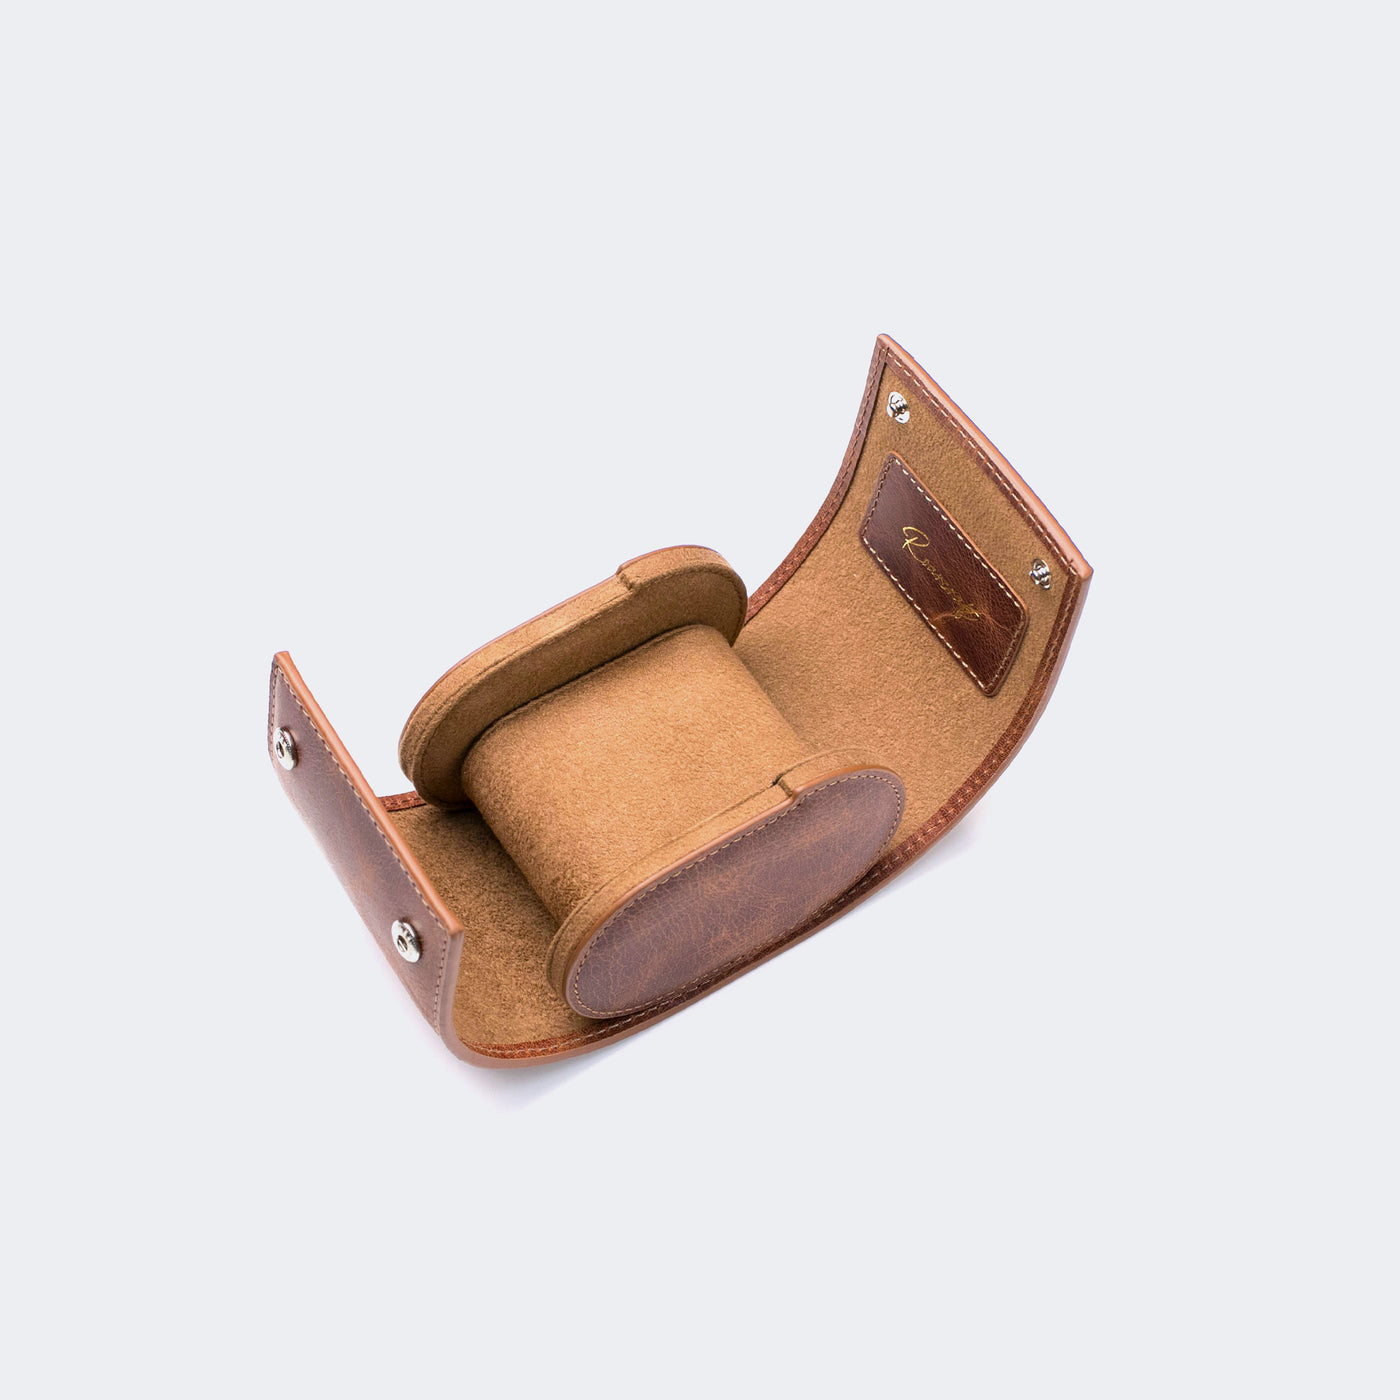 Single Watch Travel Case - Light Taupe - Granulated Leather